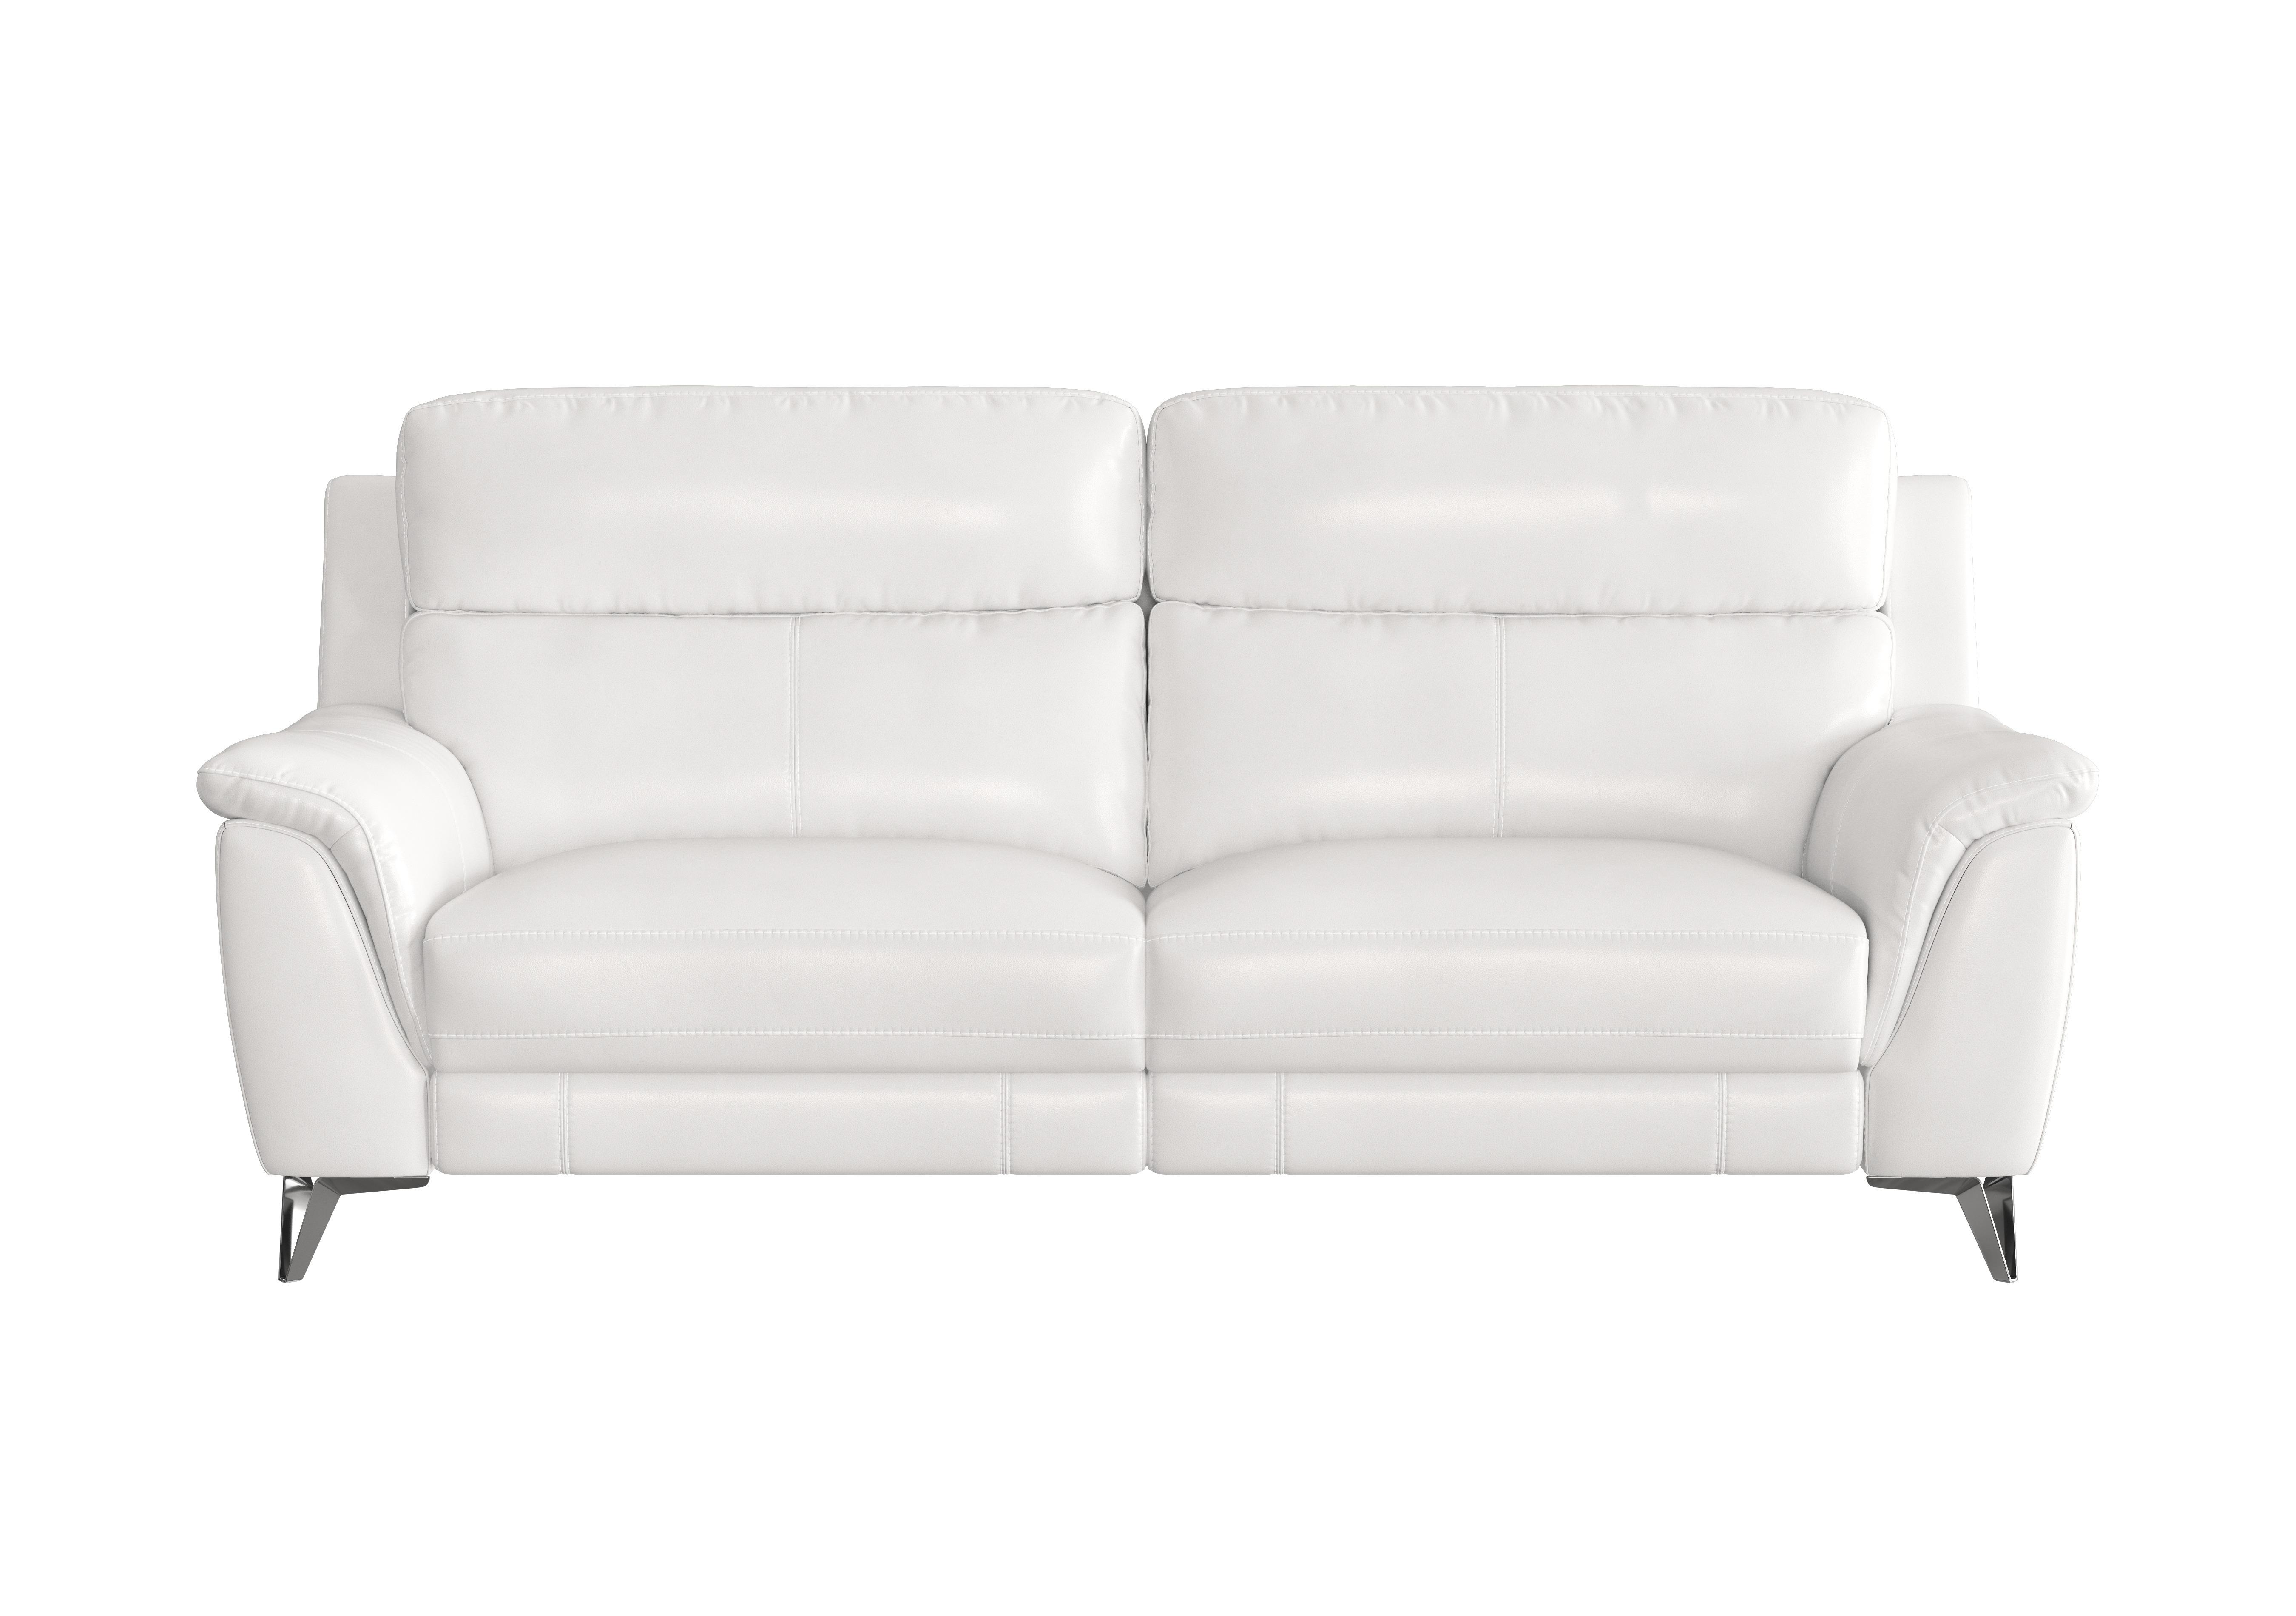 Contempo 3 Seater Leather Sofa in Bv-744d Star White on Furniture Village